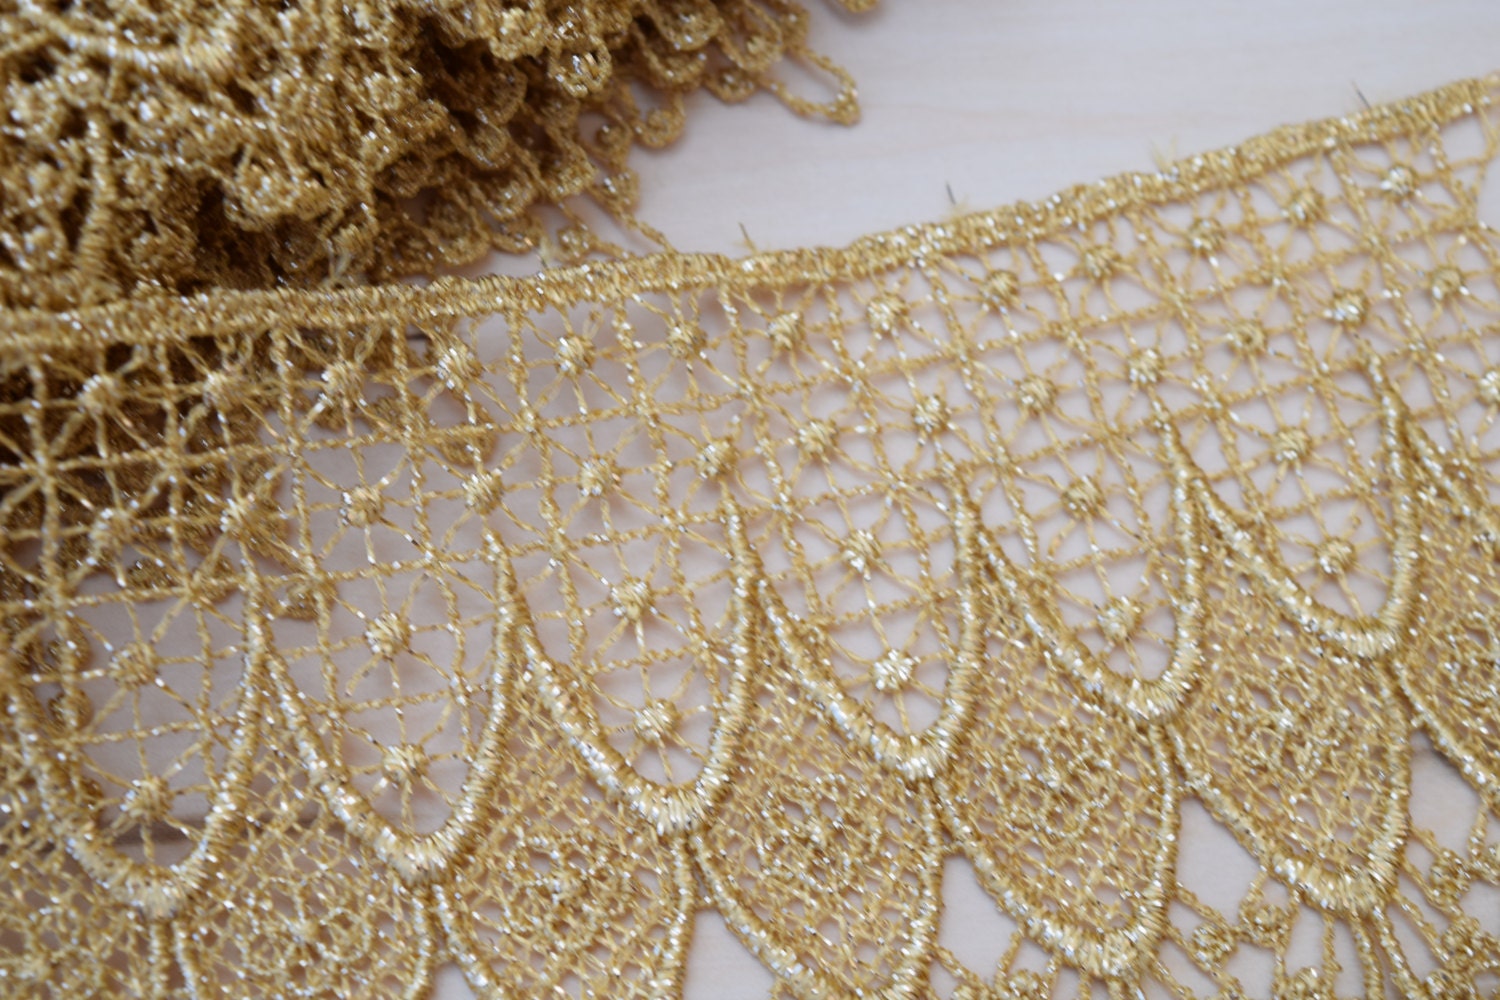 AIEI Gold Lace Trim Metaillic Venice Lace Trim Gold Embroidery Lace  Trim Love Craft Lace for Sewing, Costumes, Gowns, Home Decor (4.8 Yards)